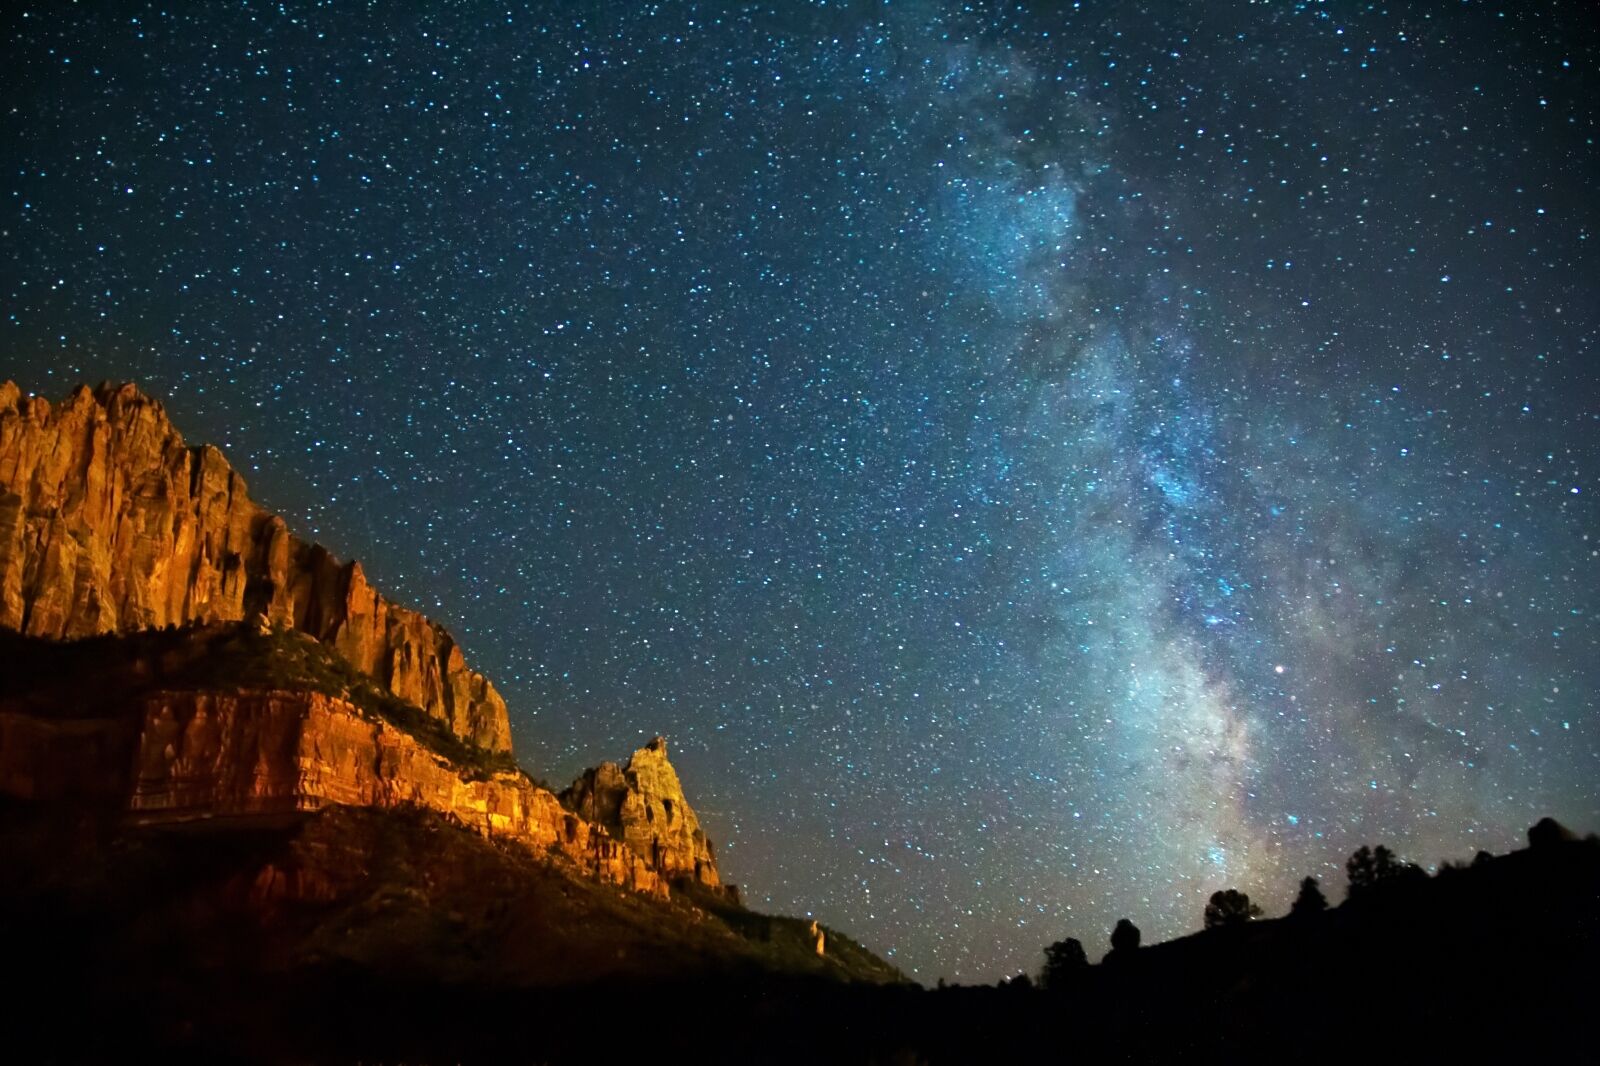 Zion Canyon National Park at night with starry sky 